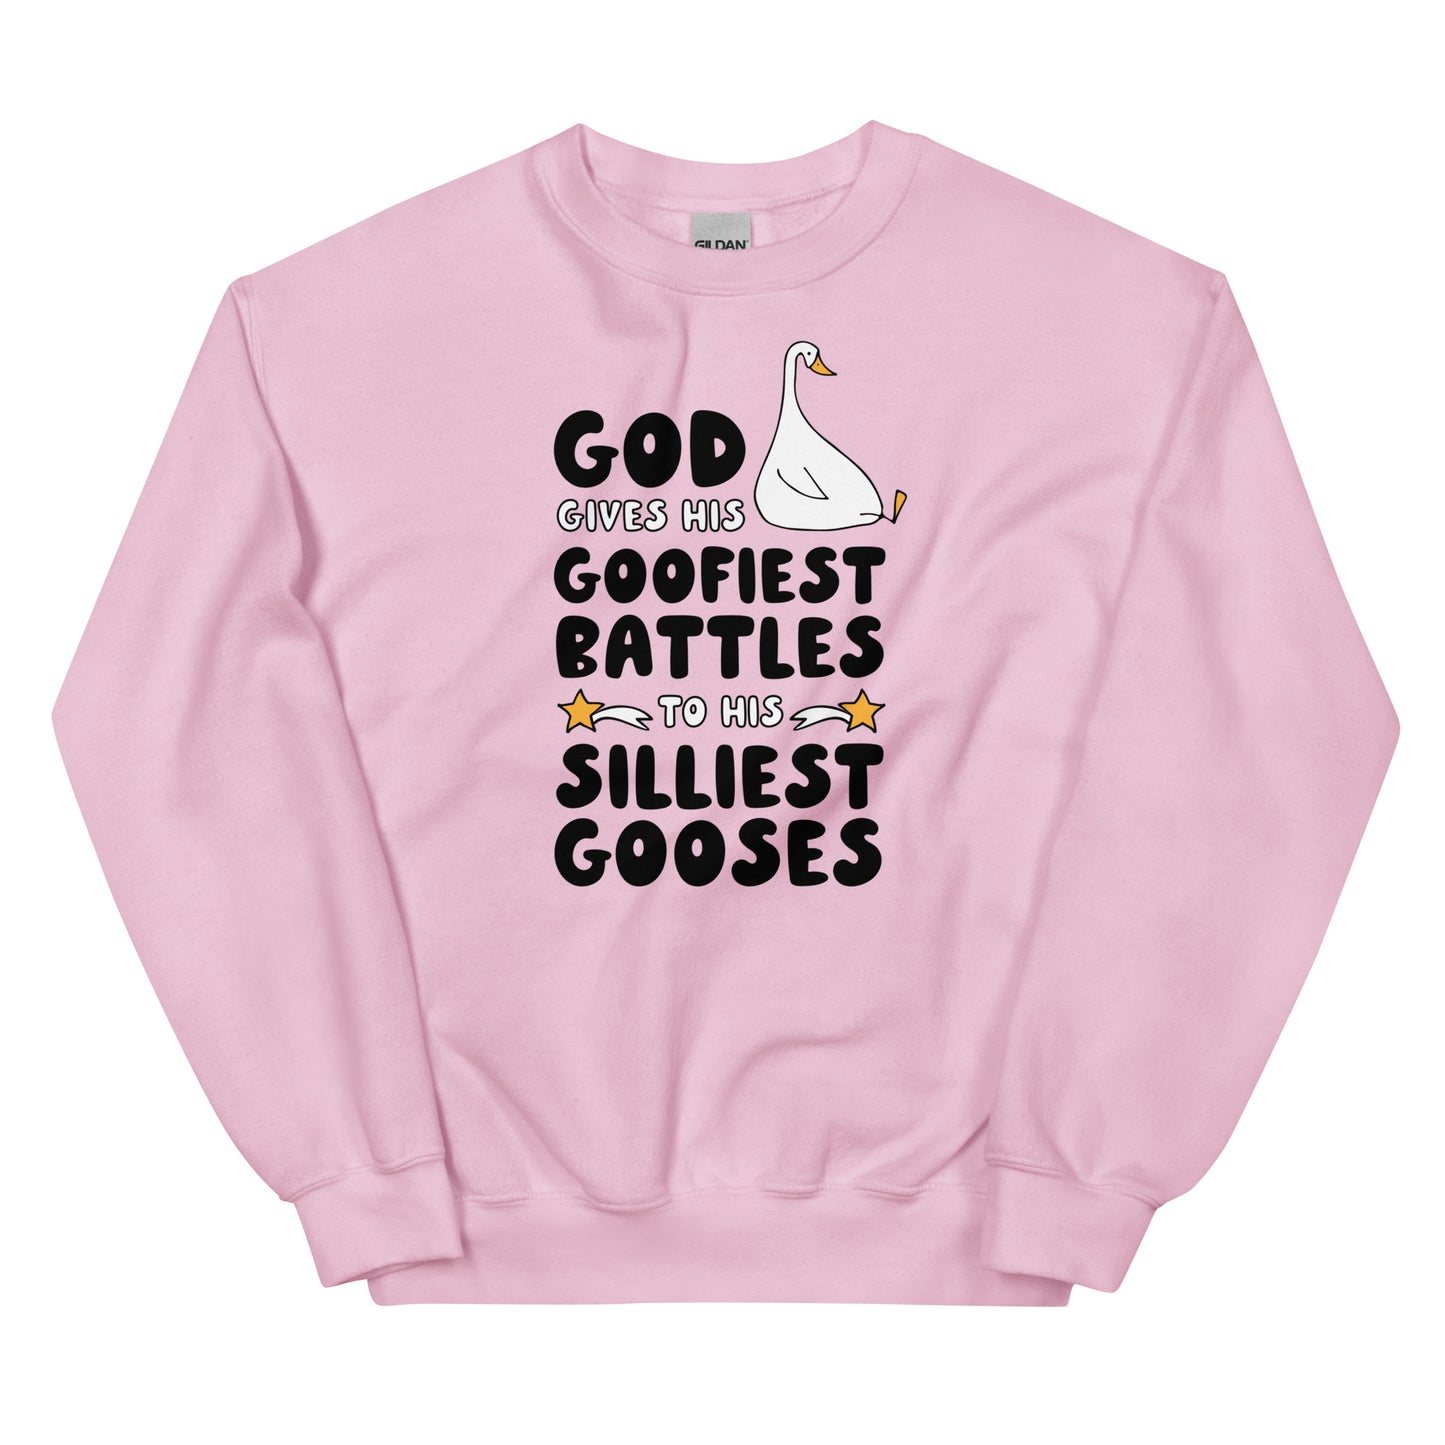 God Gives His Goofiest Battles to His Silliest Gooses Unisex Sweatshirt